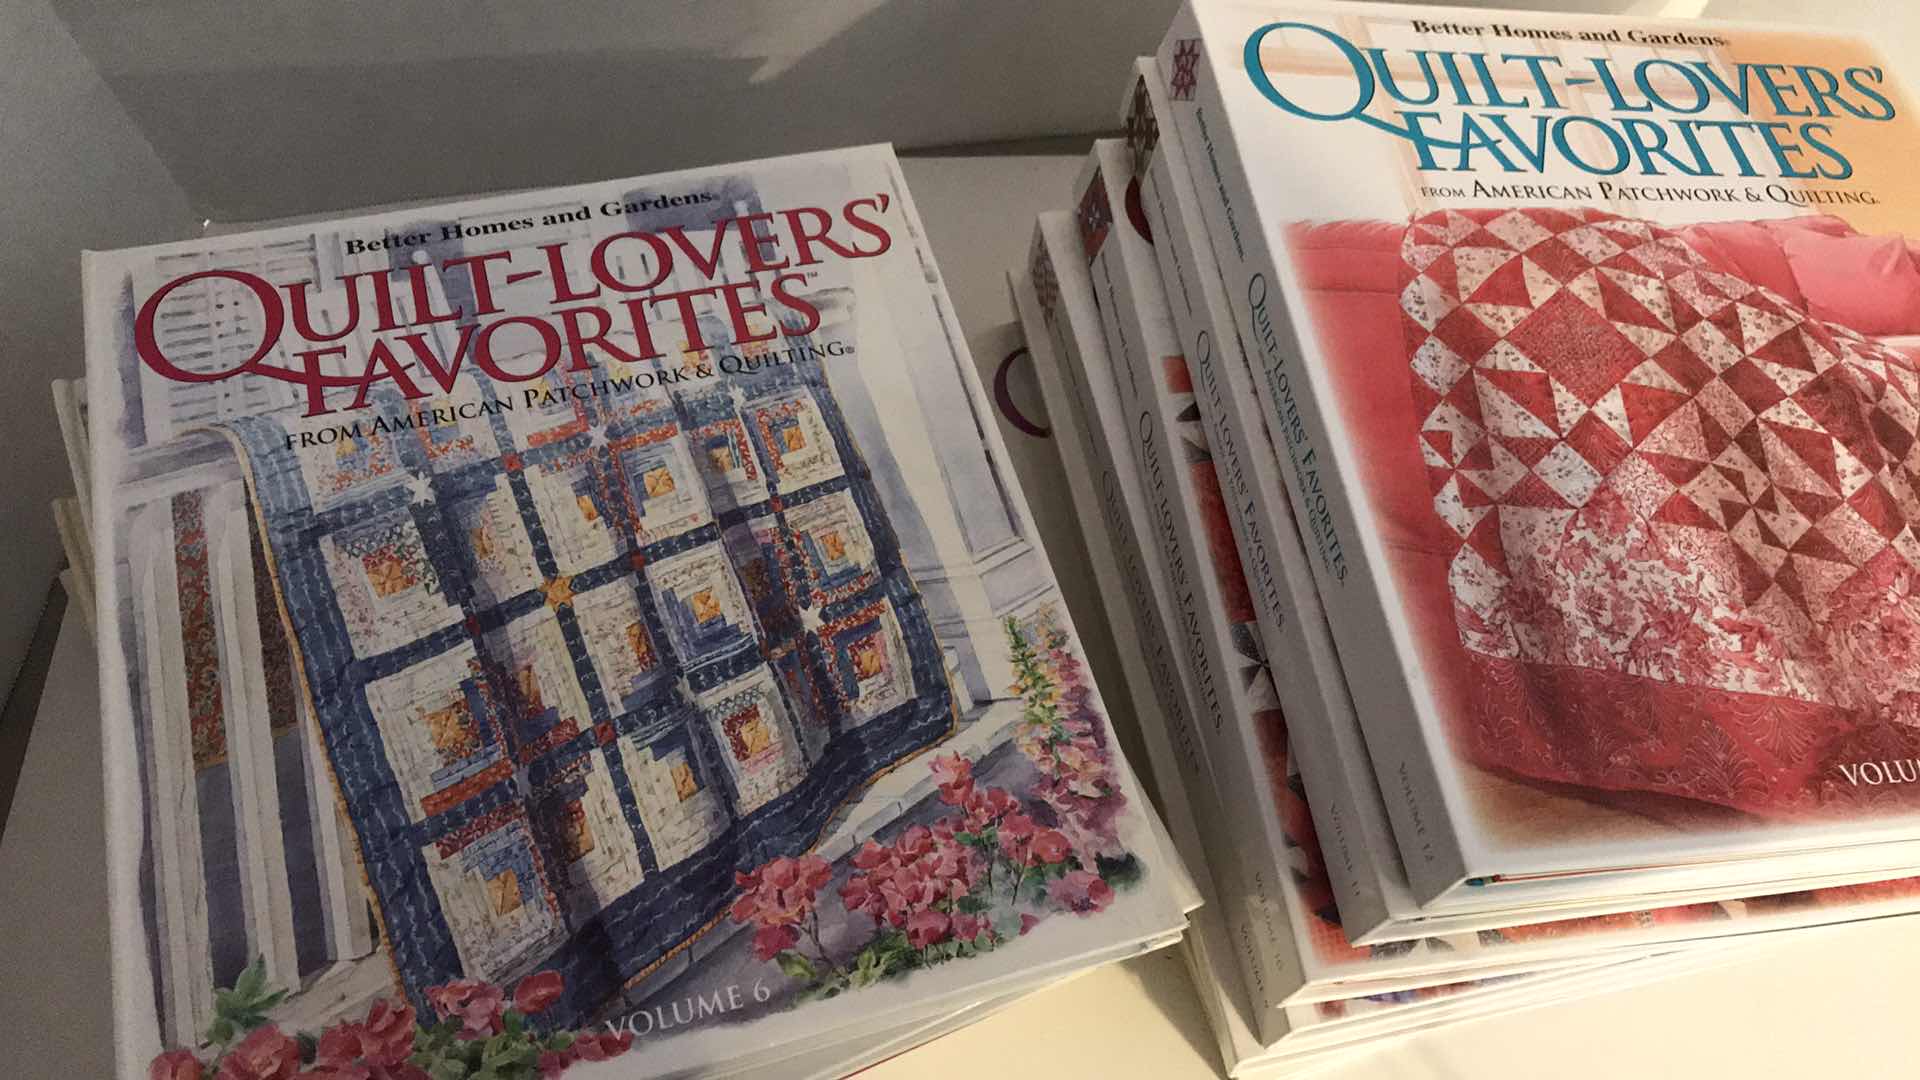 Photo 3 of BETTER HOMES AND GARDENS QUILT LOVERS FAVORITES, VOLUMES 2-12